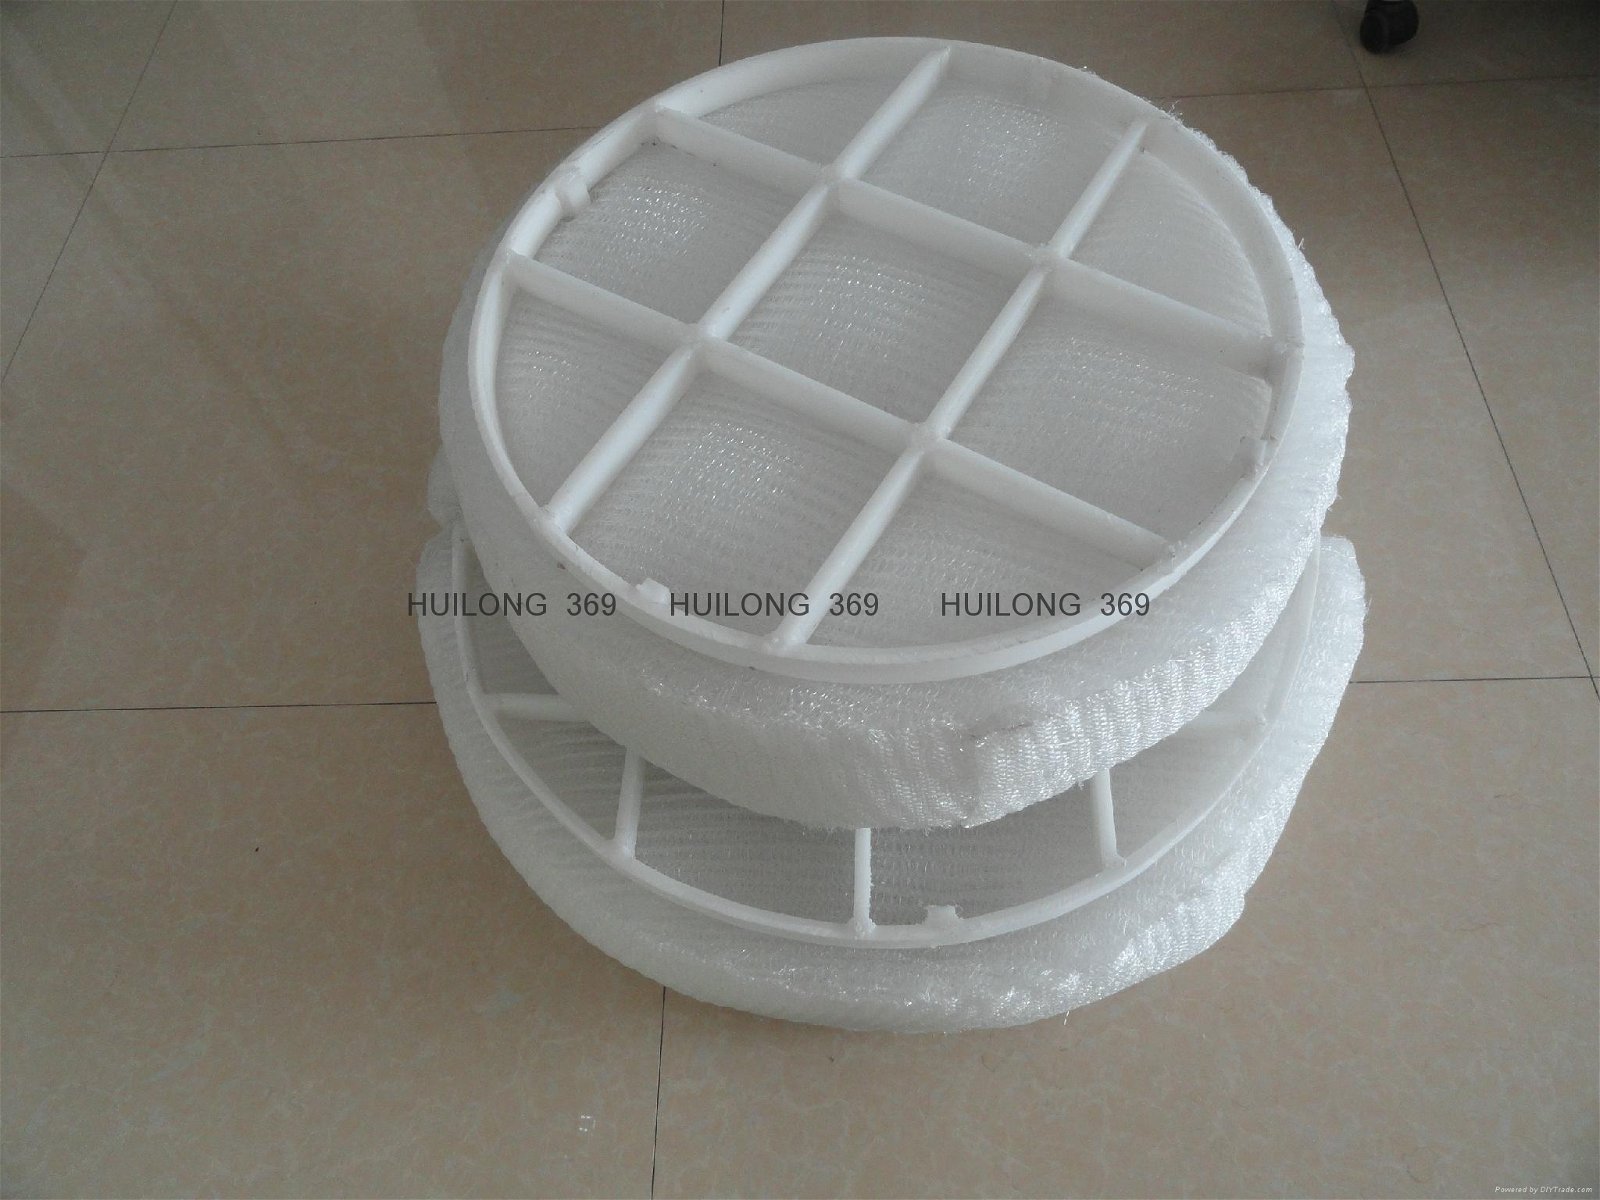 Required plastic demister pad 2